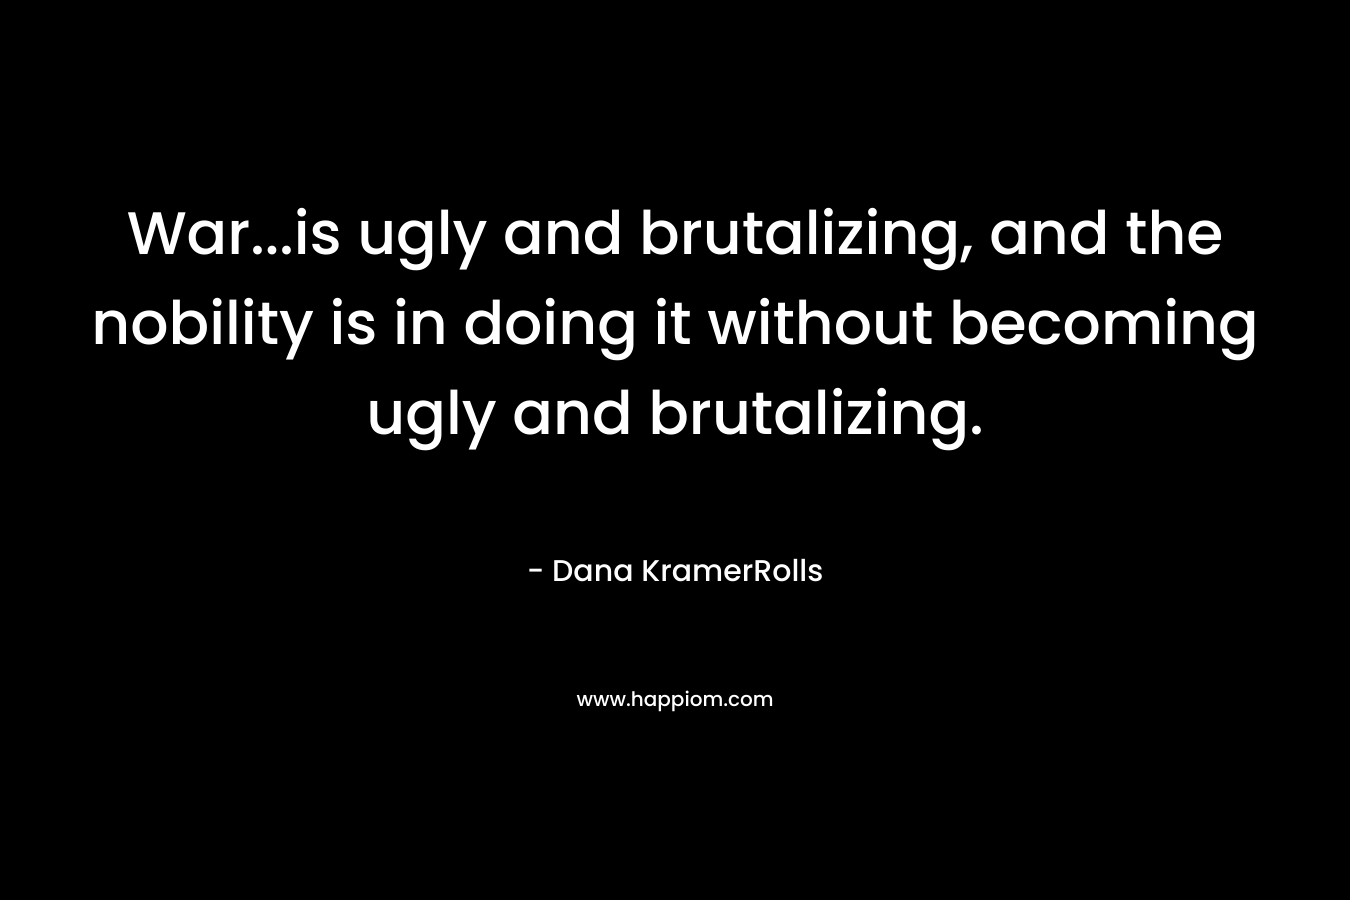 War…is ugly and brutalizing, and the nobility is in doing it without becoming ugly and brutalizing. – Dana KramerRolls